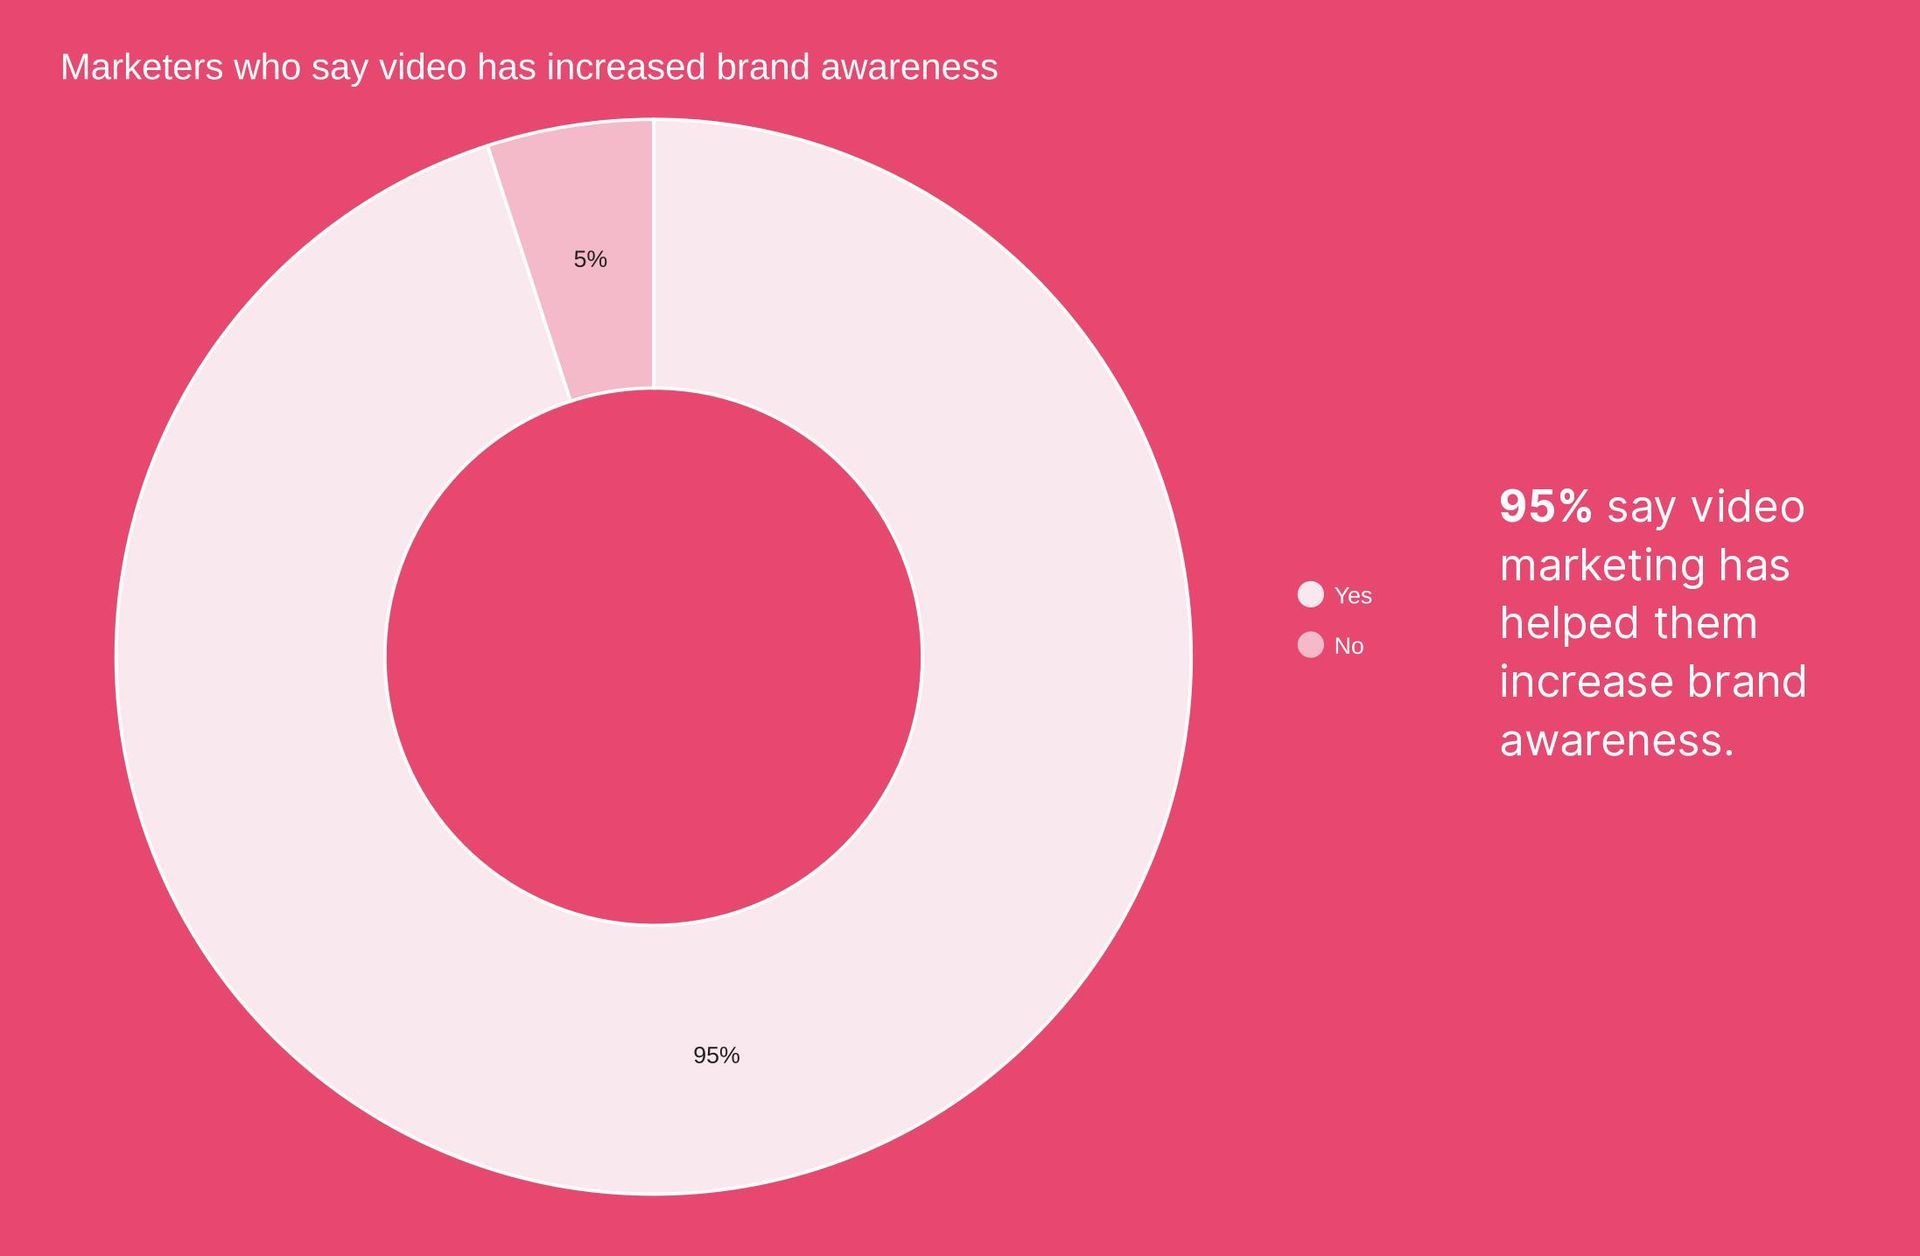 A graph showing 95% of marketers say video marketing has helped them increase brand awareness